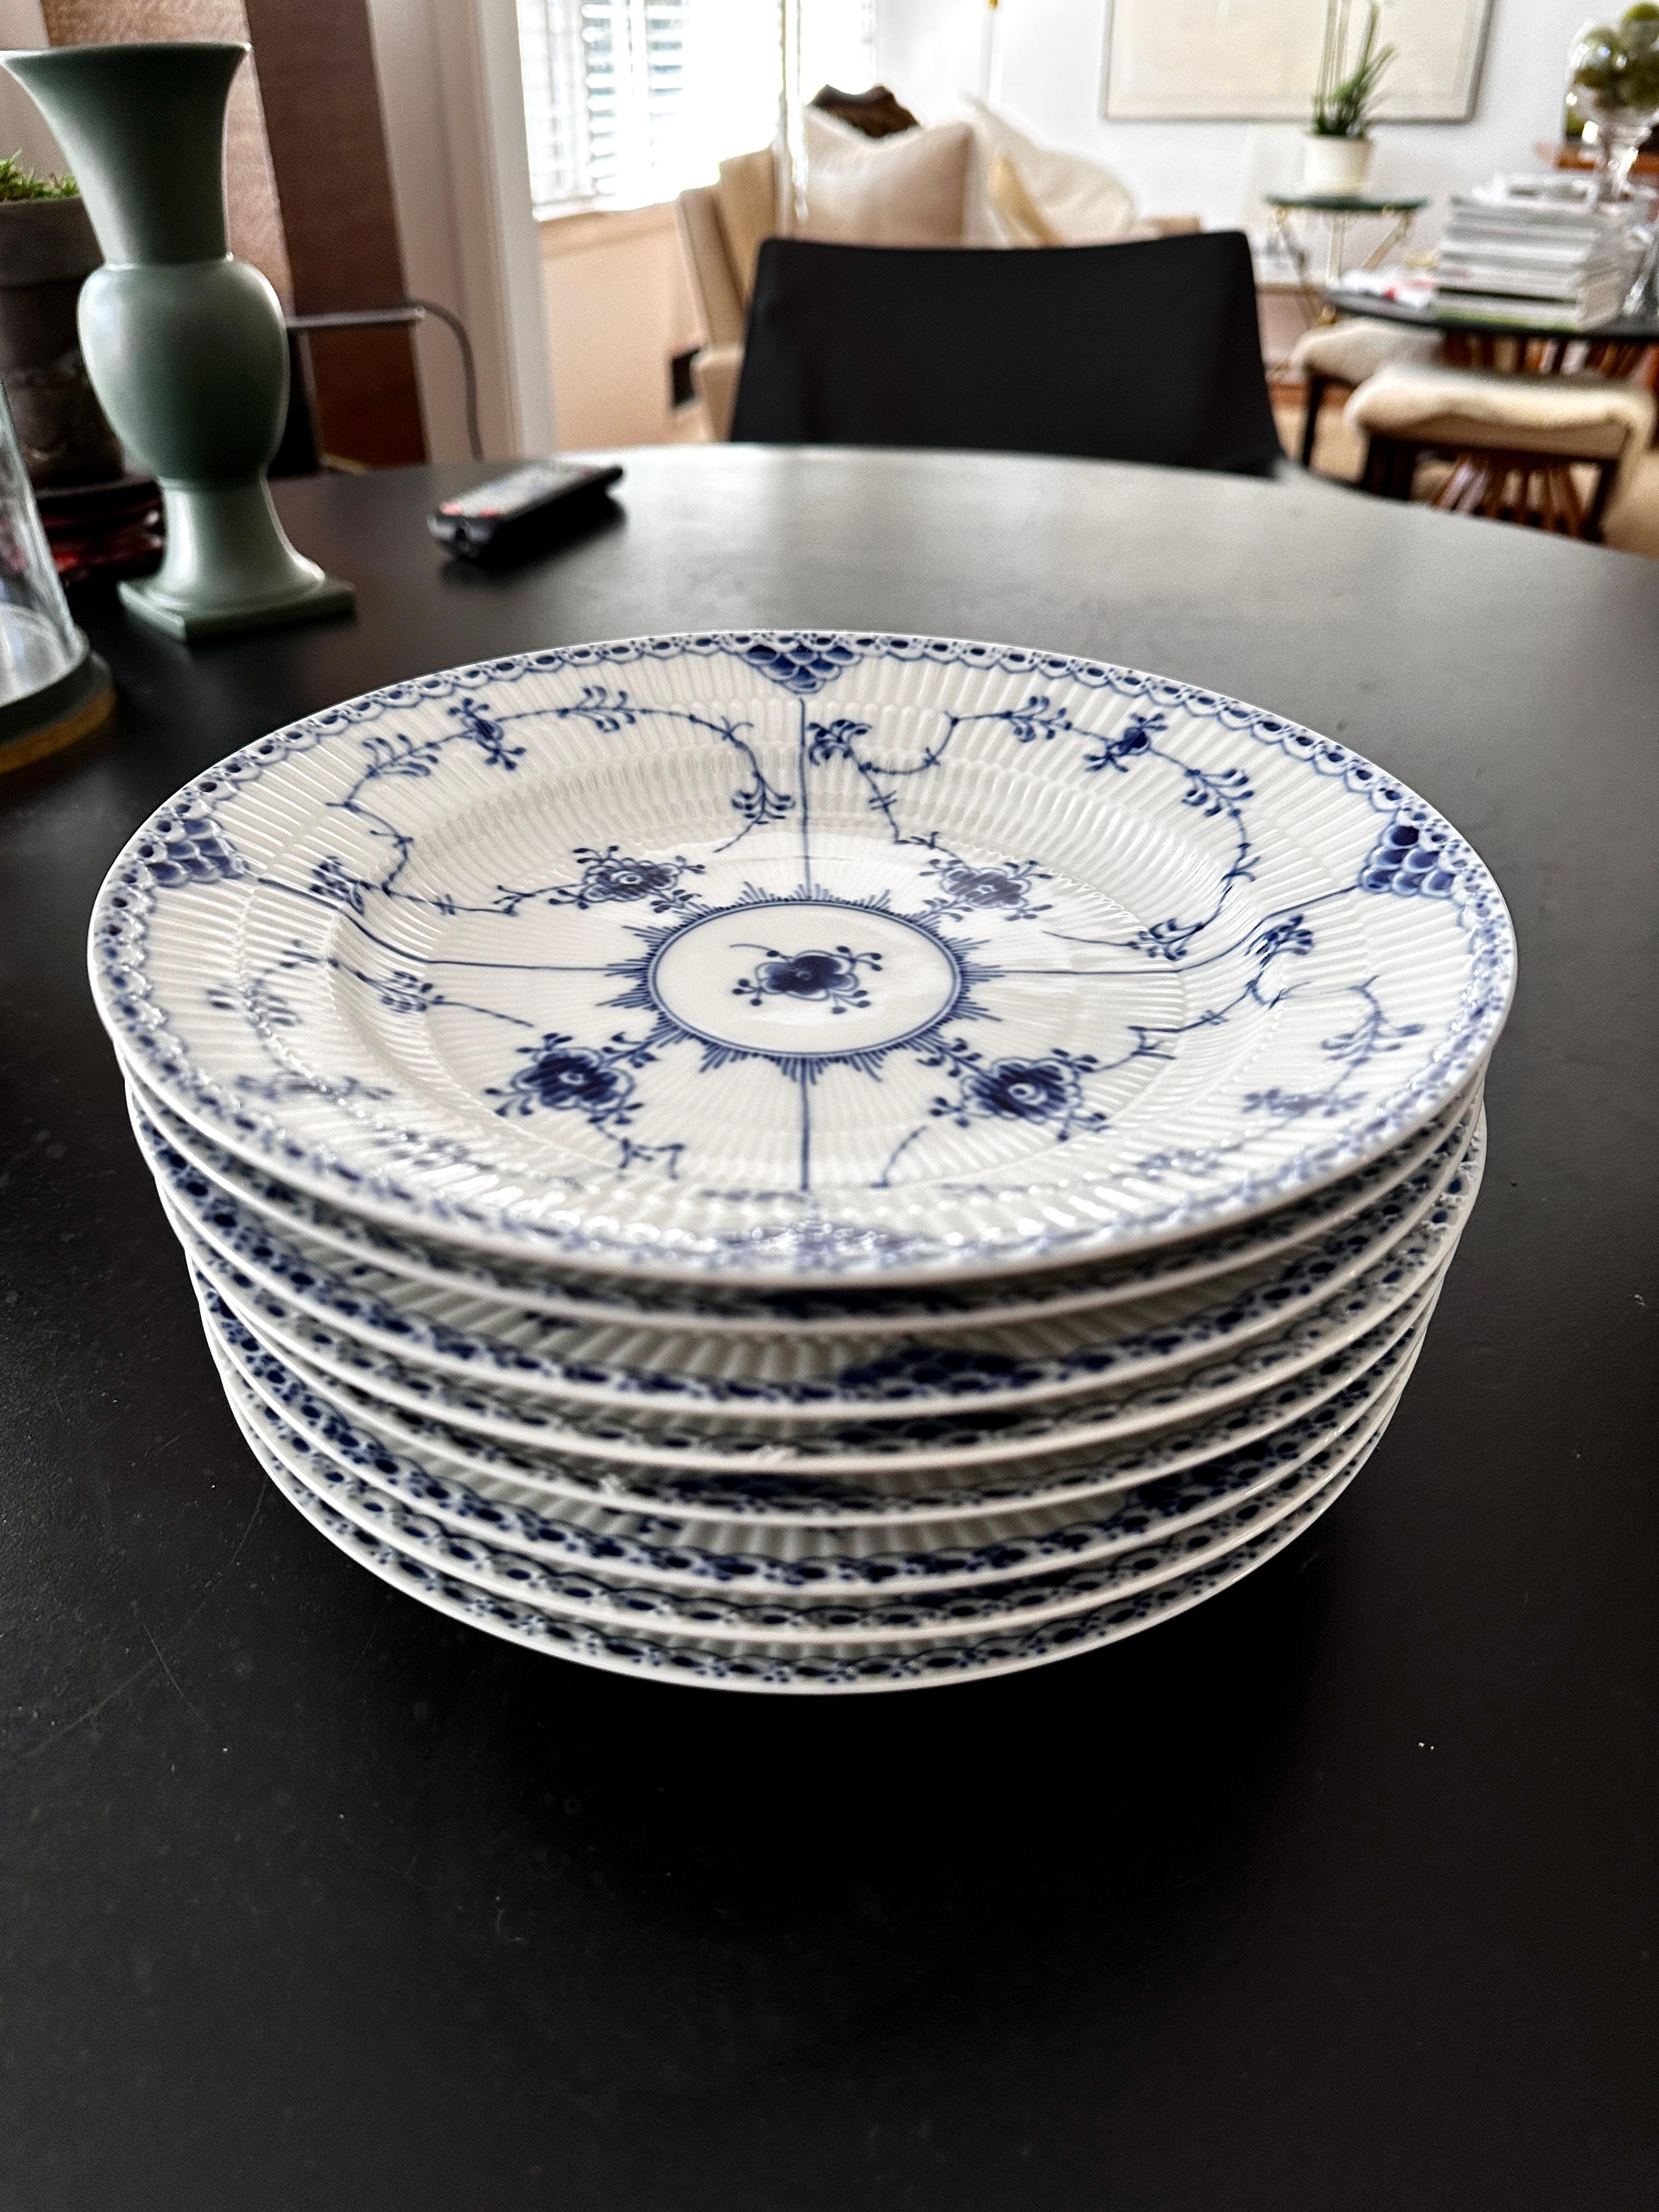 The story of Royal Copenhagen began with Blue Fluted Plain in 1775. For almost 250 years the pattern has shown its timelessness, endurance, and vitality and inspired exploration and reinterpretation. As the first ever Royal Copenhagen pattern, Blue